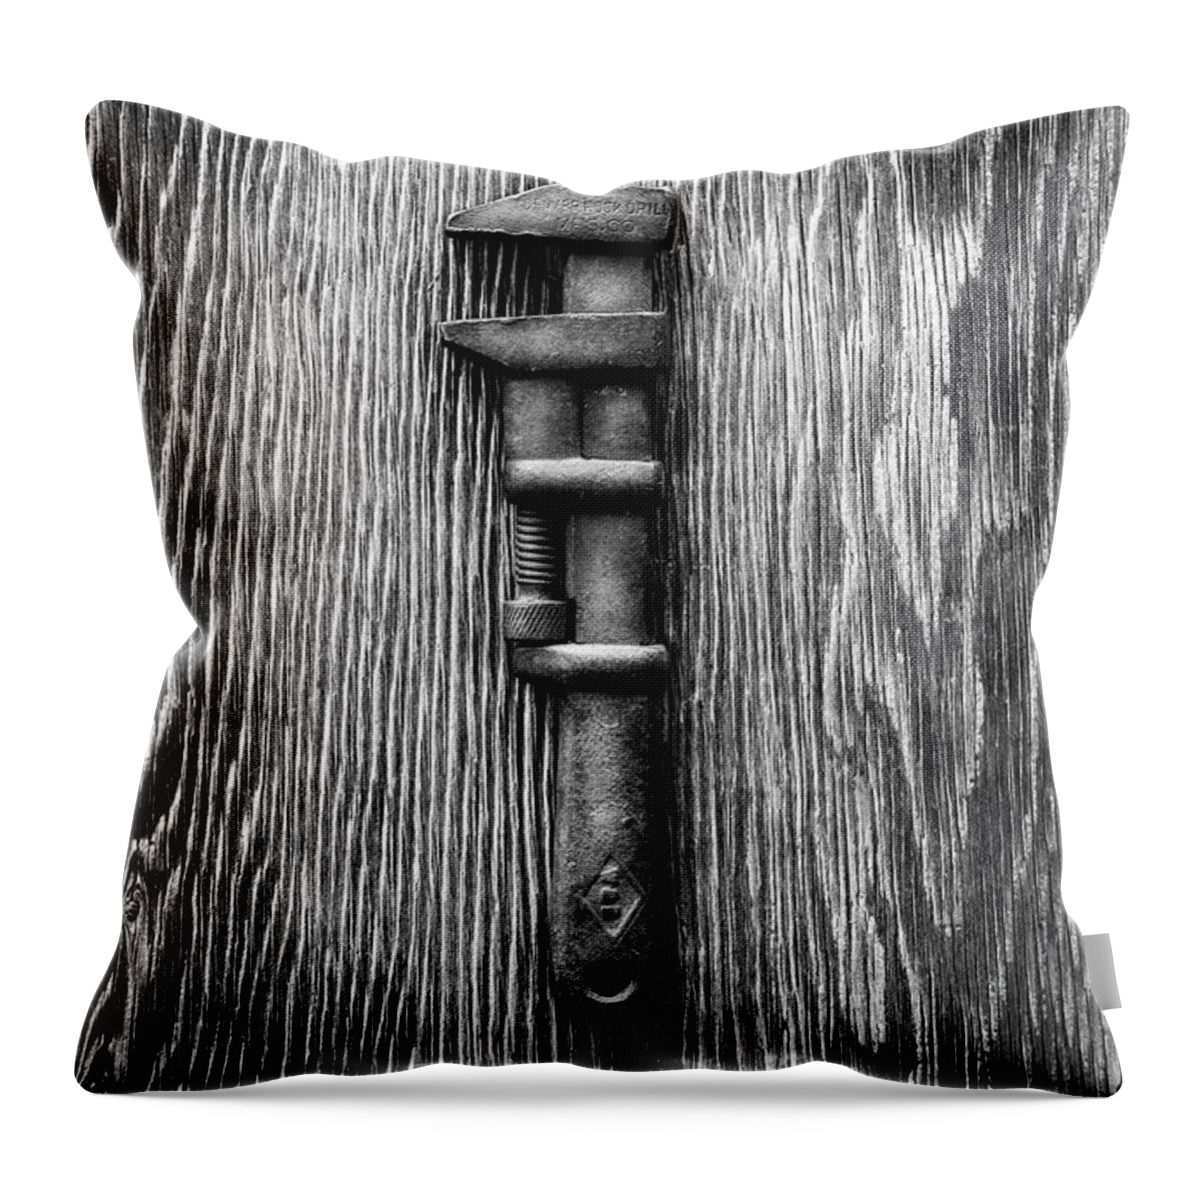 Antique Throw Pillow featuring the photograph Antique Adjustable Wrench BW by YoPedro